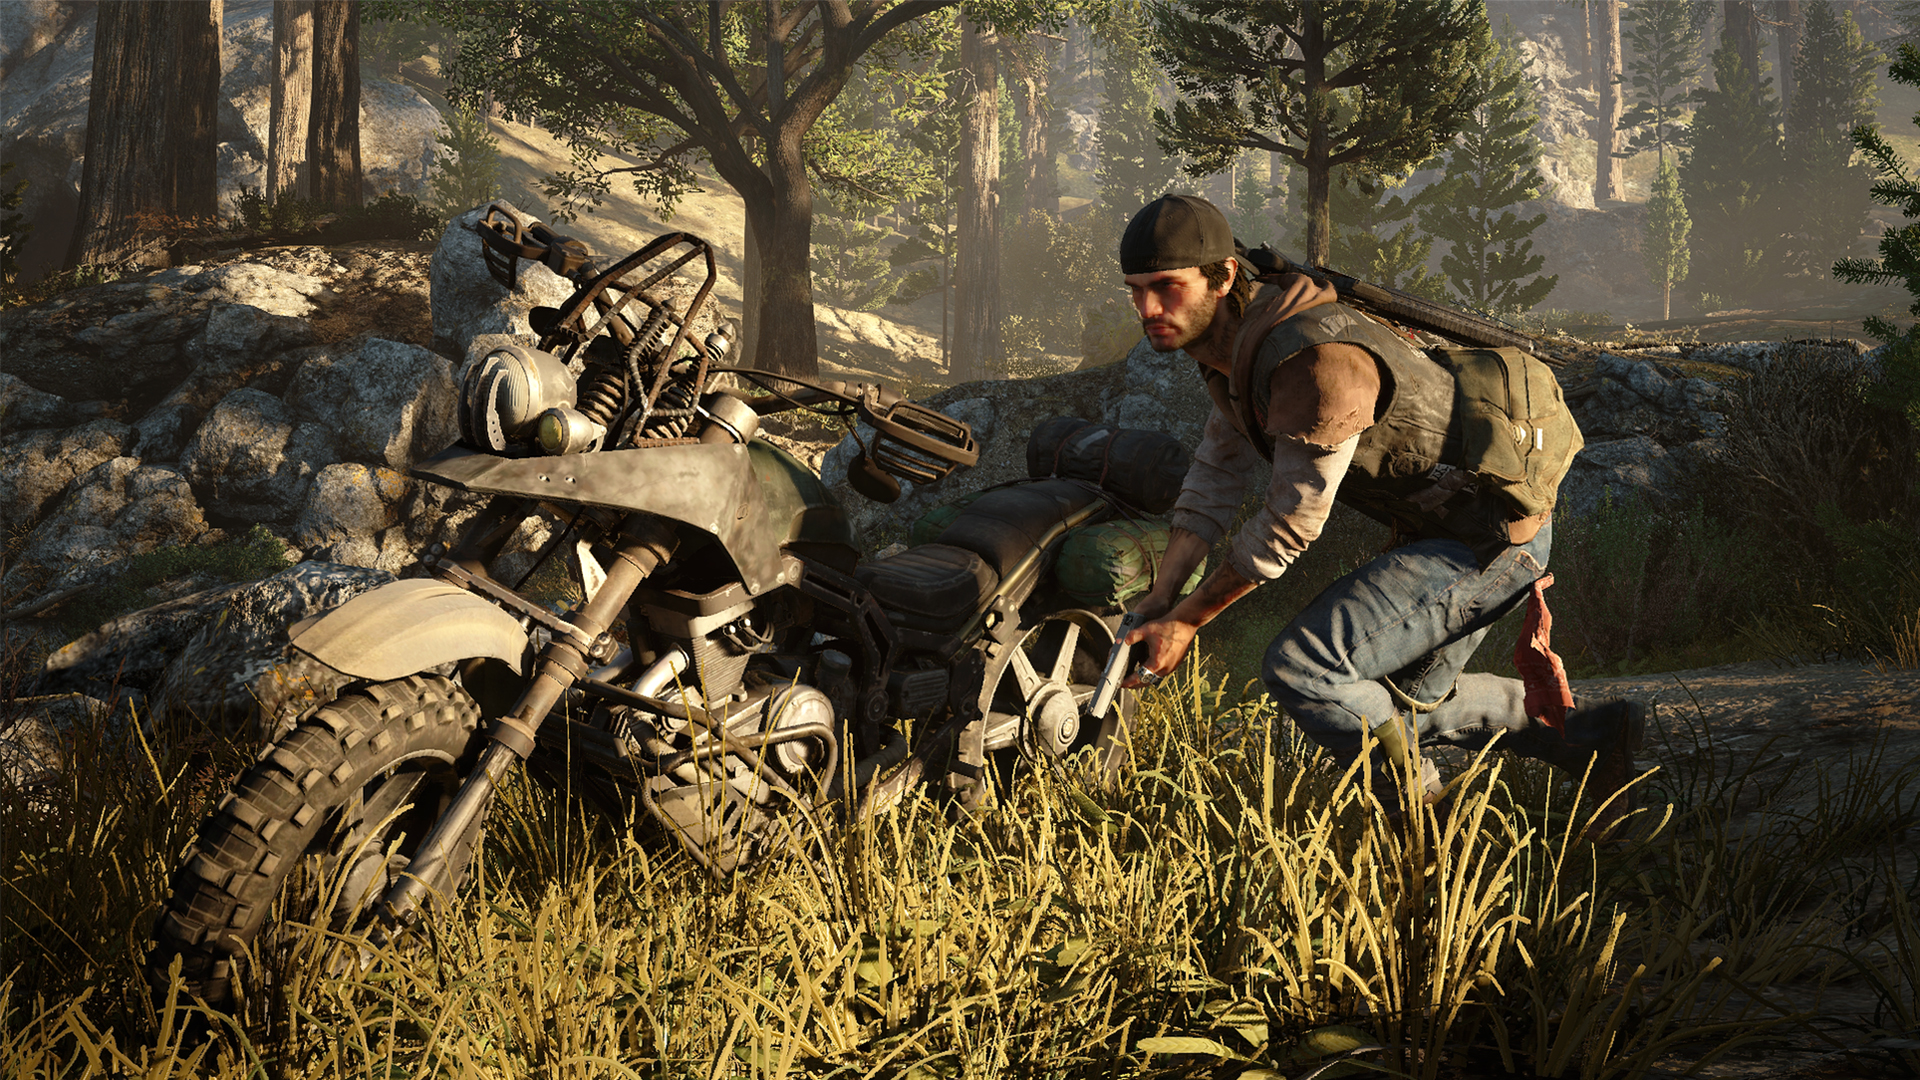 Video Games Days Gone Sony Playstation Game Art Motorcycle Daylight Foliage Hat 1920x1080